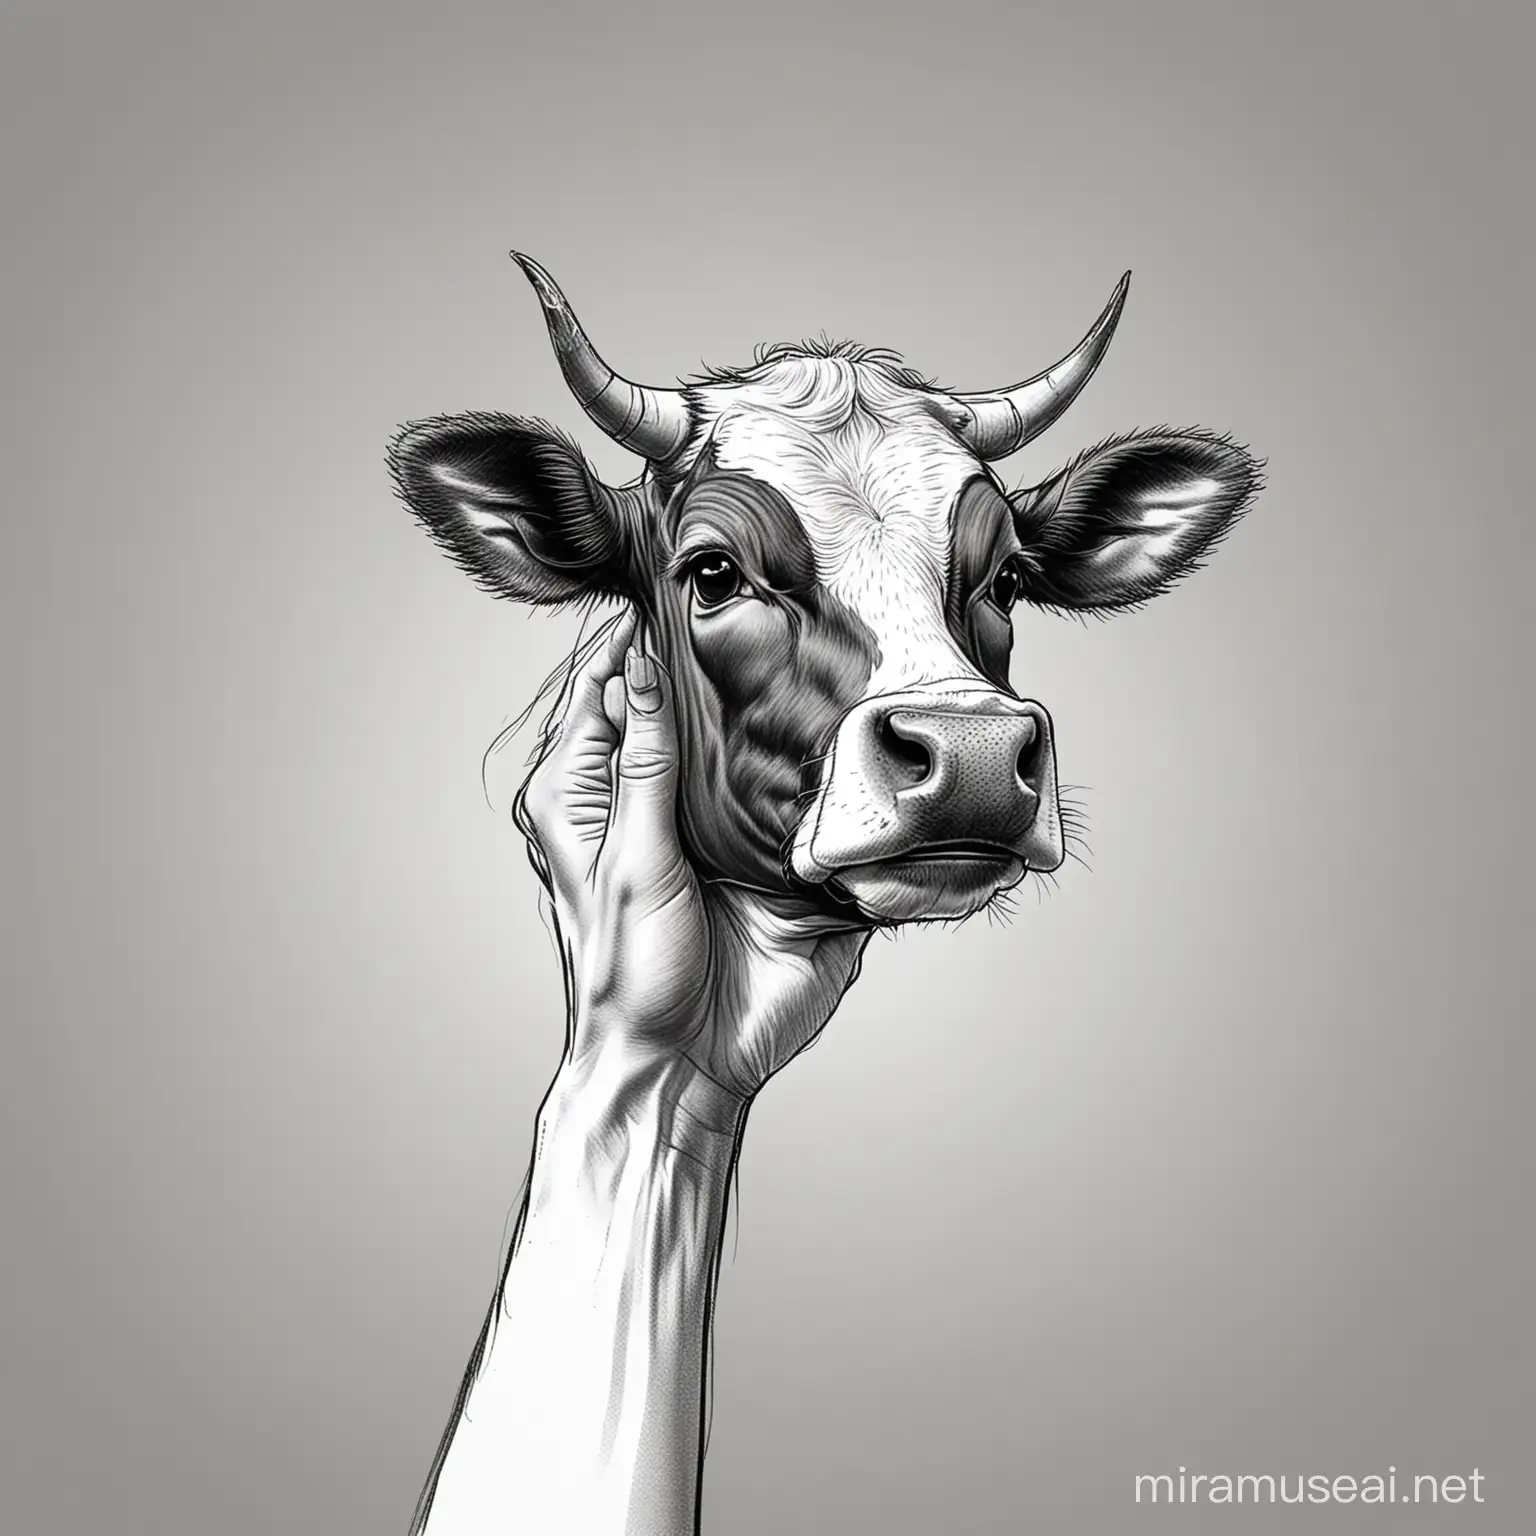 Cartoon Arm Holding Cow Hand in Black and White Line Art